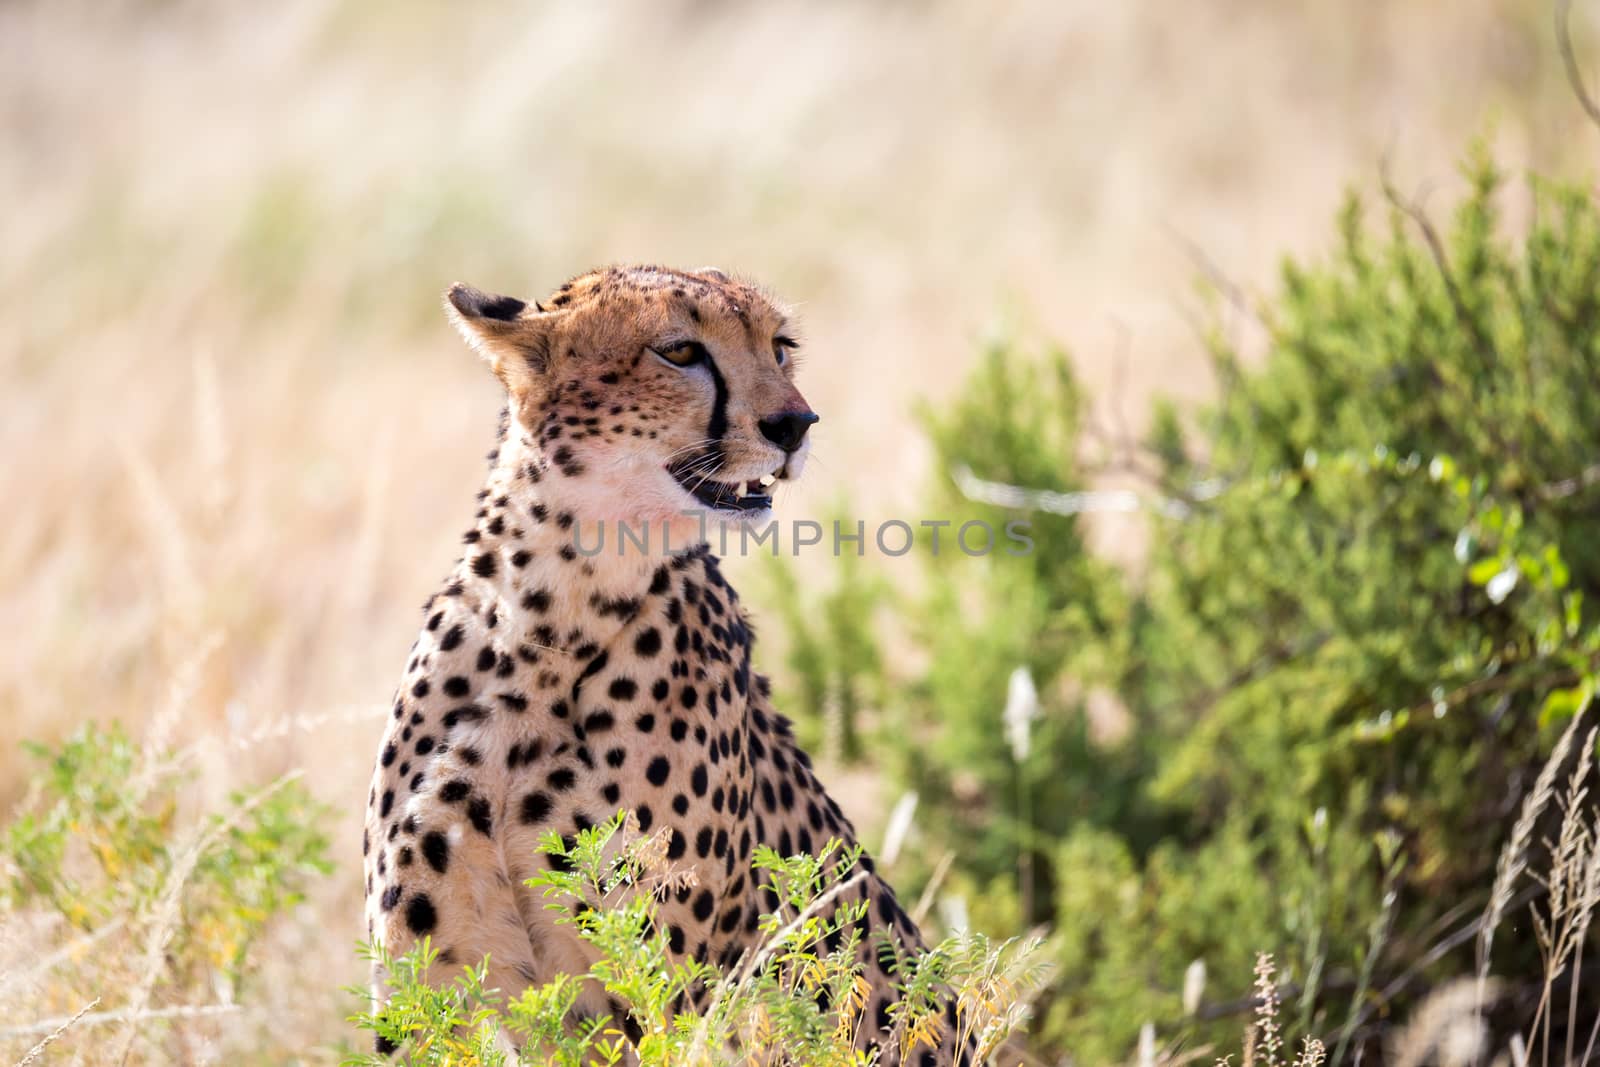 One cheetah in the grass landscape between the bushes